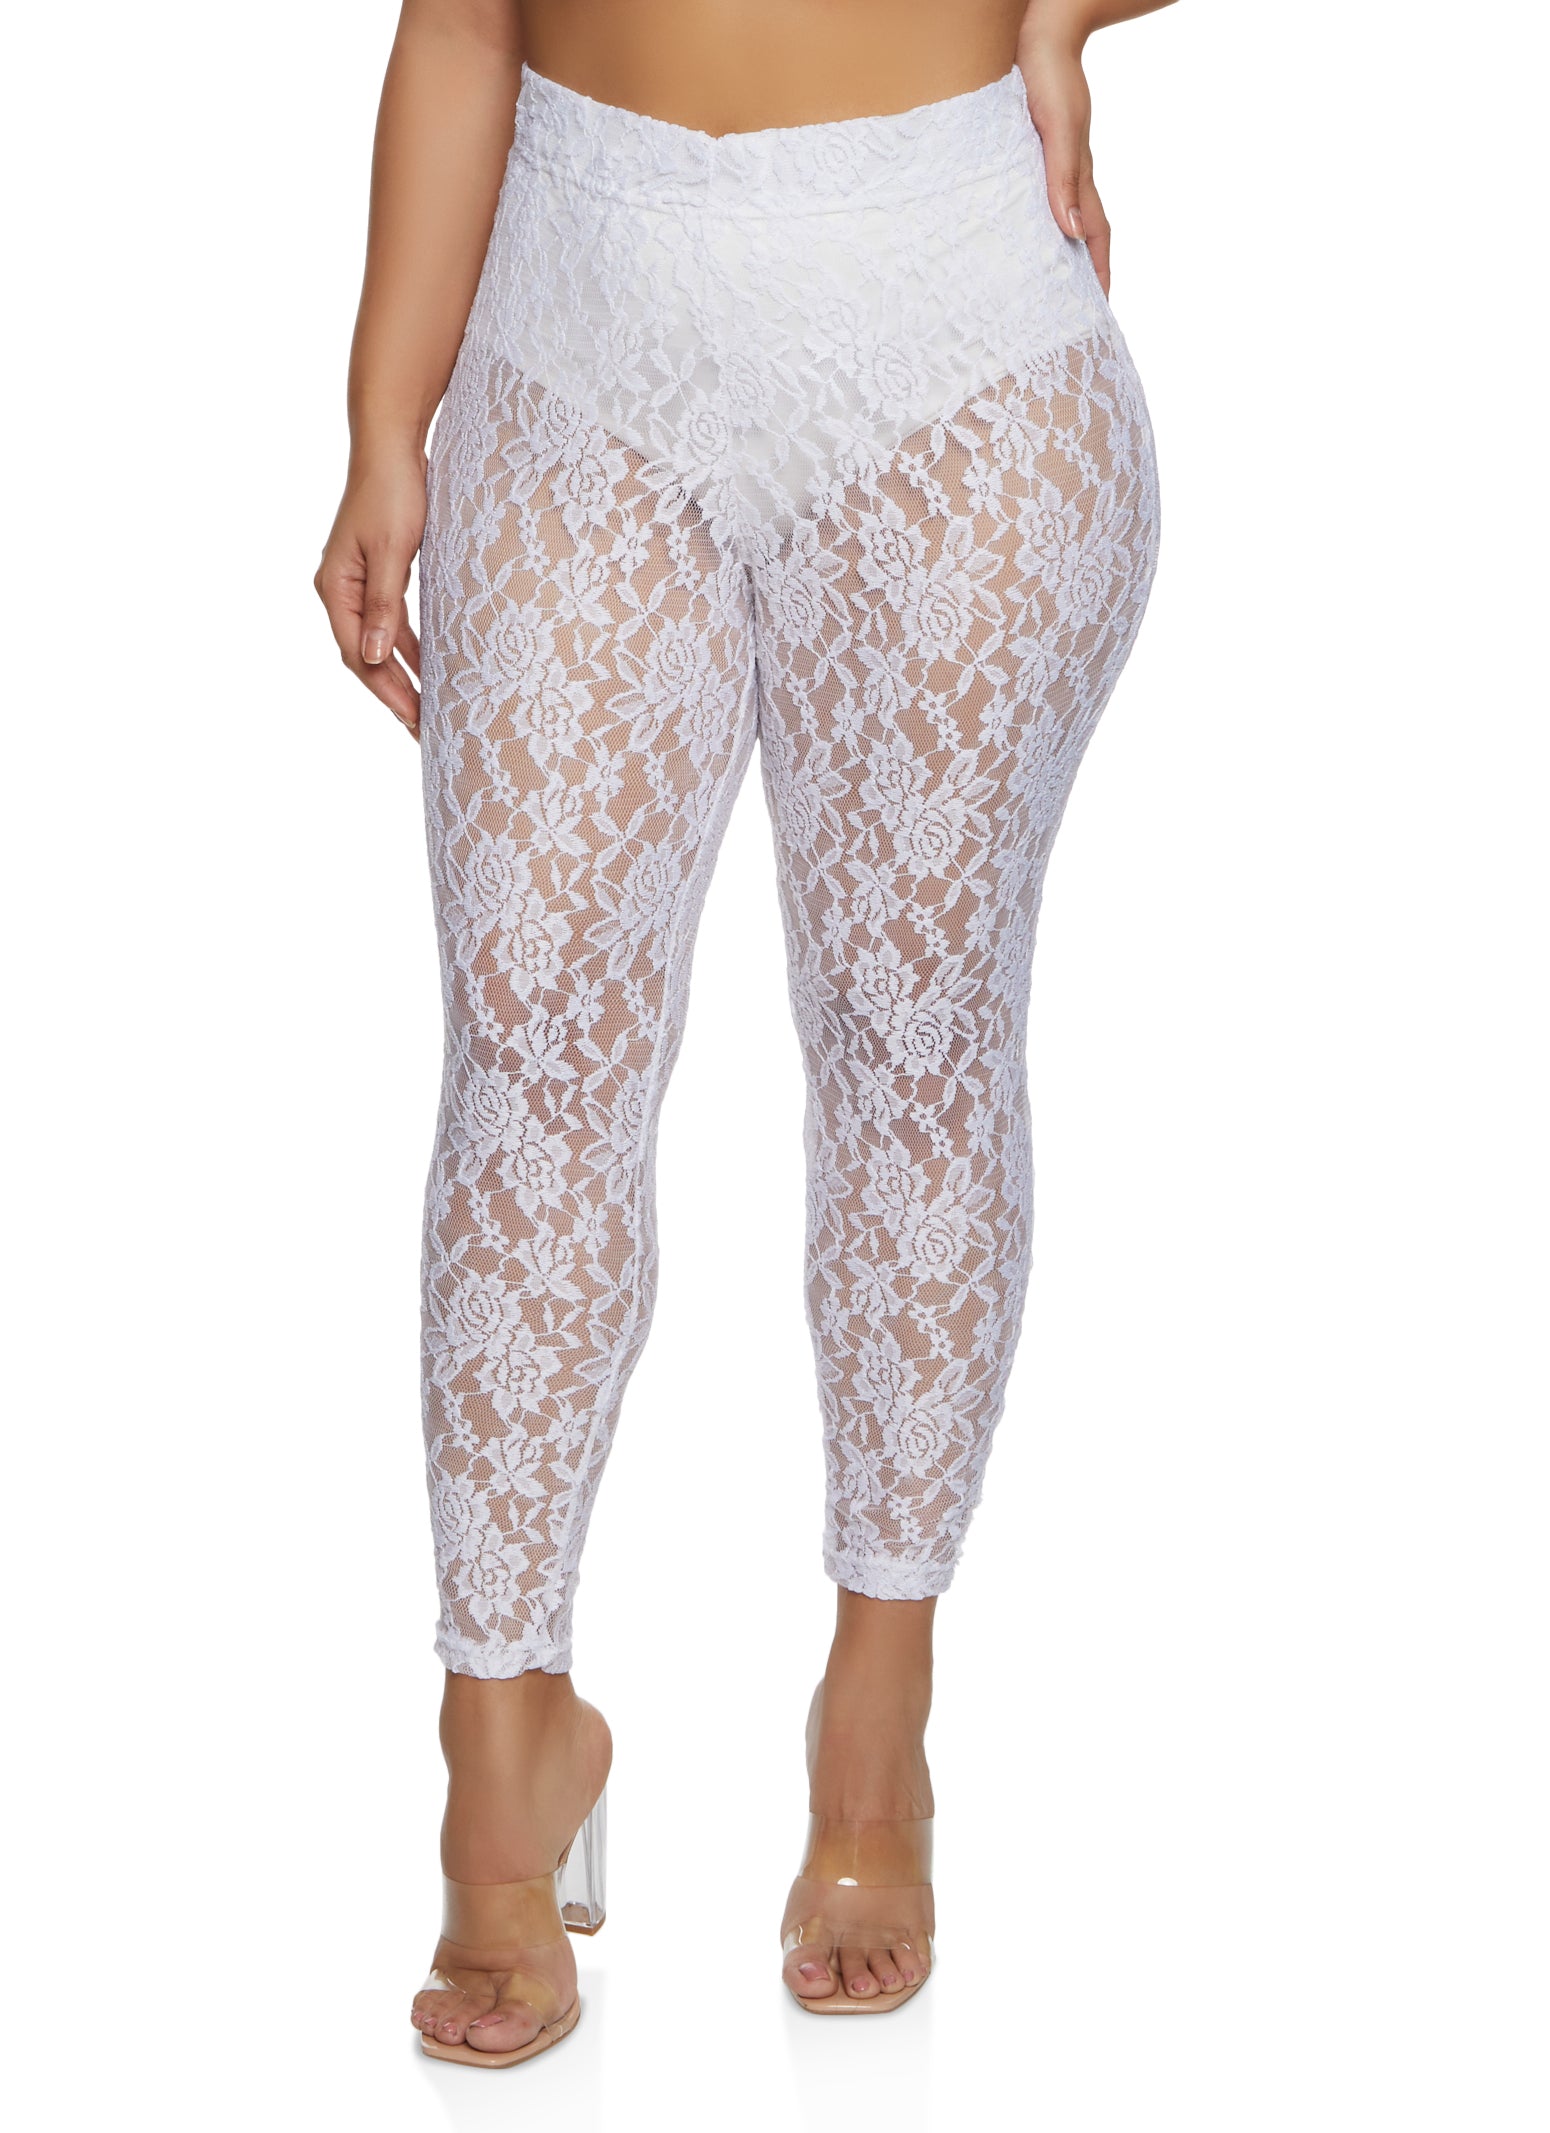 Plus Size Lace High Waisted Leggings - White